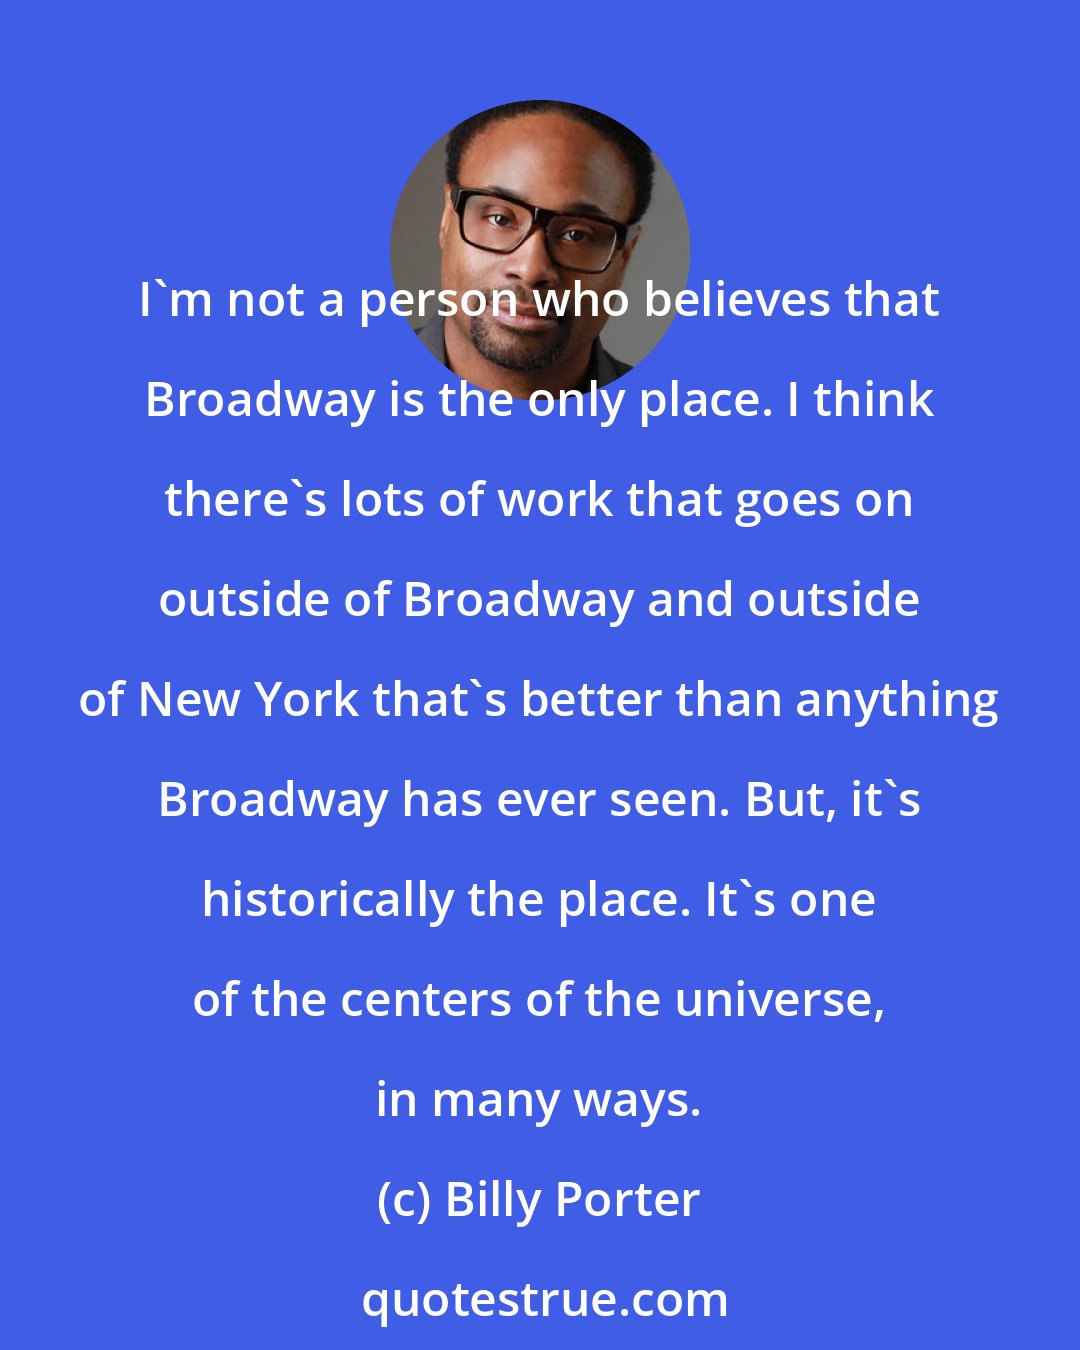 Billy Porter: I'm not a person who believes that Broadway is the only place. I think there's lots of work that goes on outside of Broadway and outside of New York that's better than anything Broadway has ever seen. But, it's historically the place. It's one of the centers of the universe, in many ways.